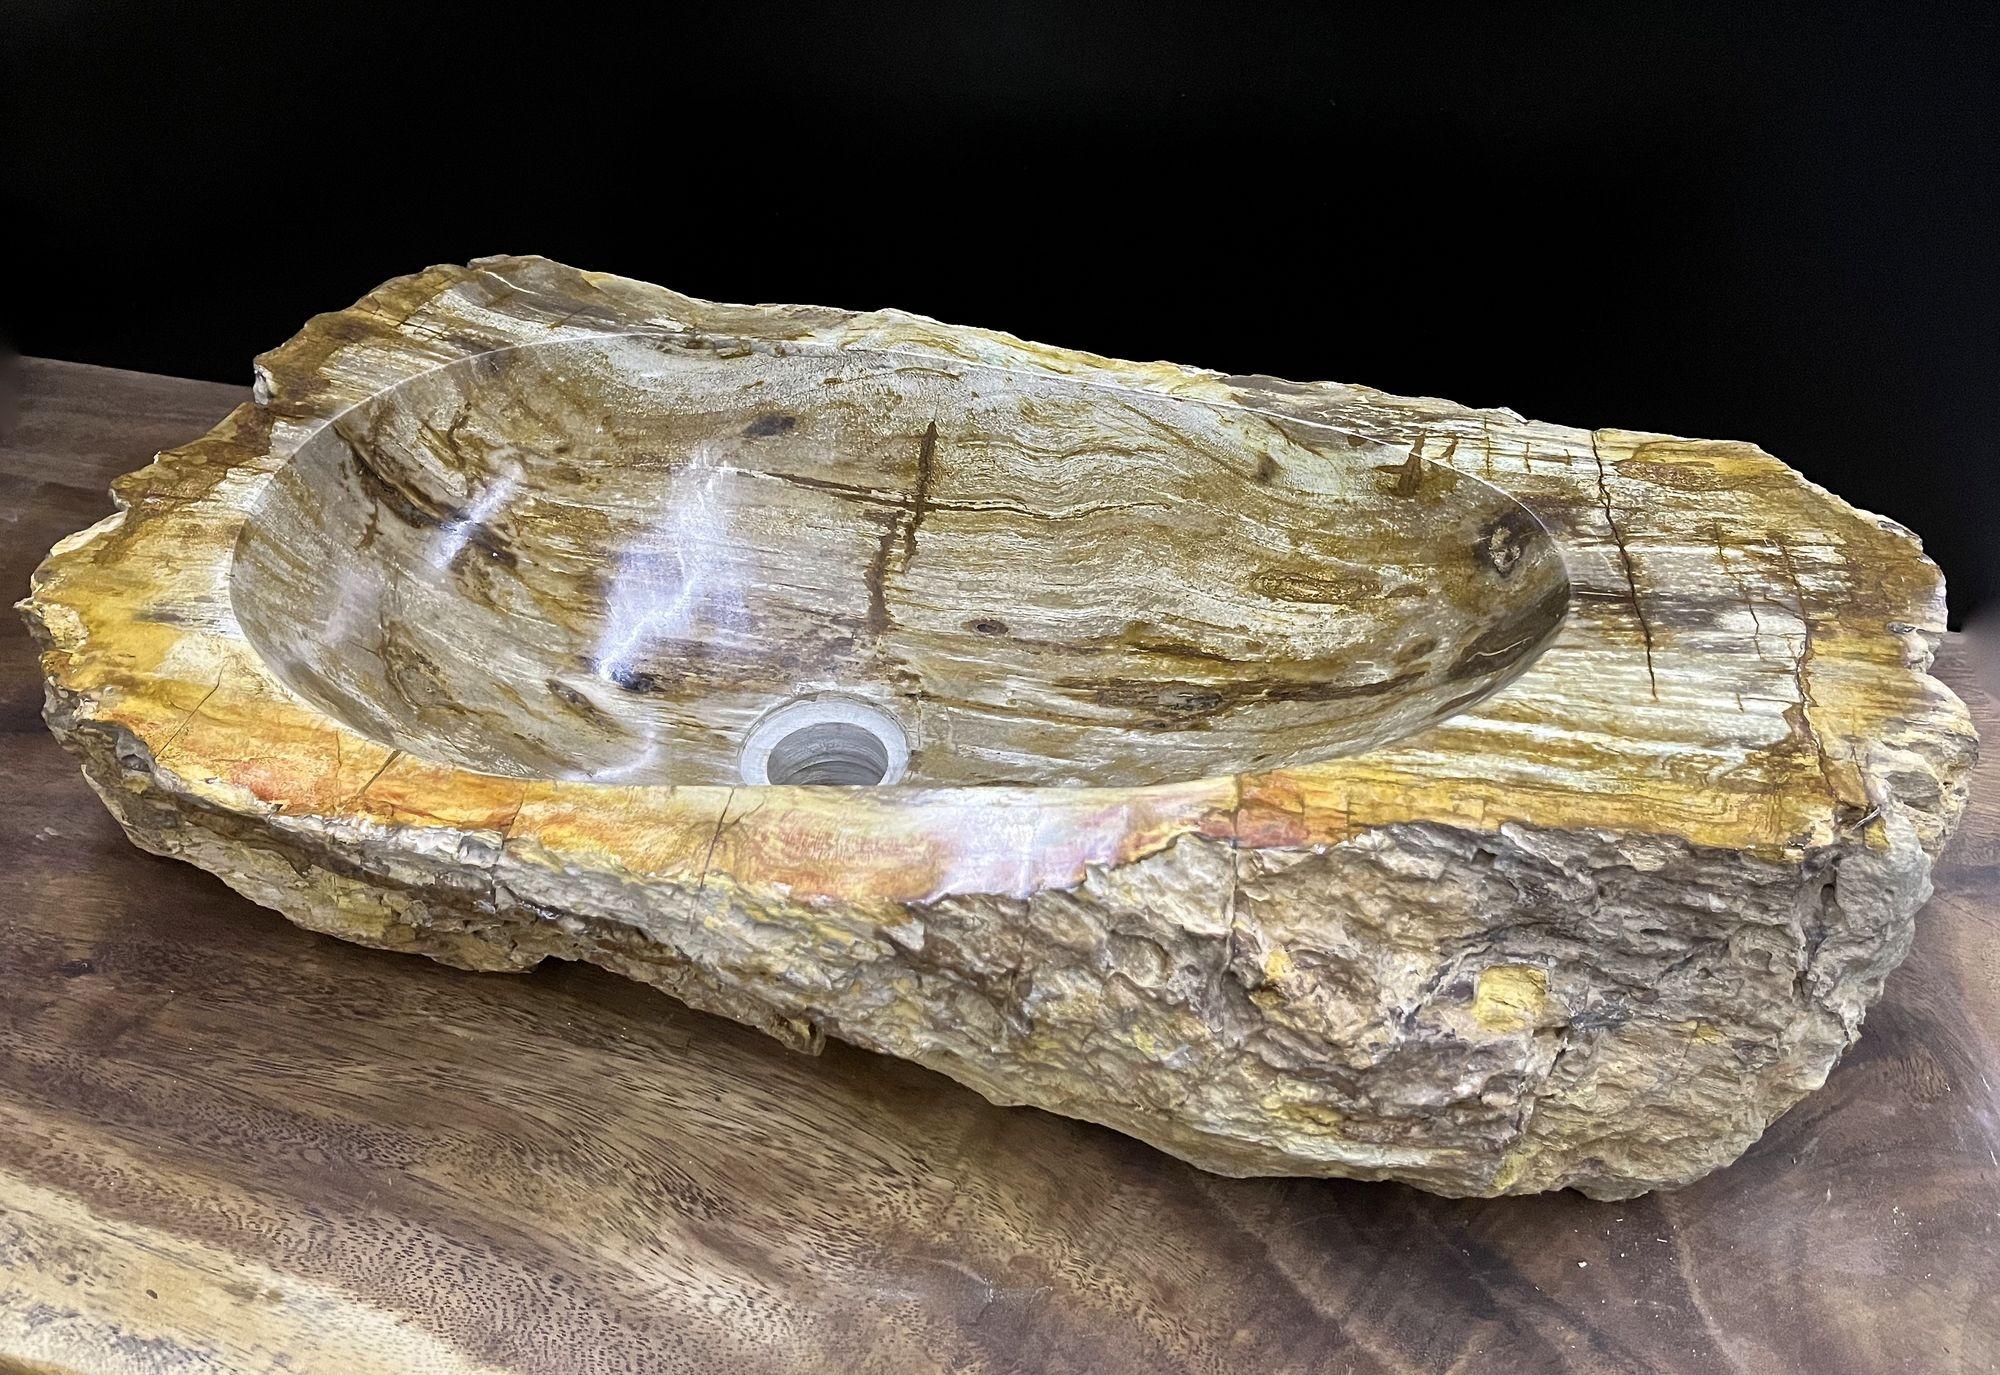 Outstanding looking petrified wood sink in absolute top quality with polished basin. The outstanding natural coloration in beige, brown and yellow tones is matchless. An exceptional piece elaborately worked out of petrified wood impressing with a